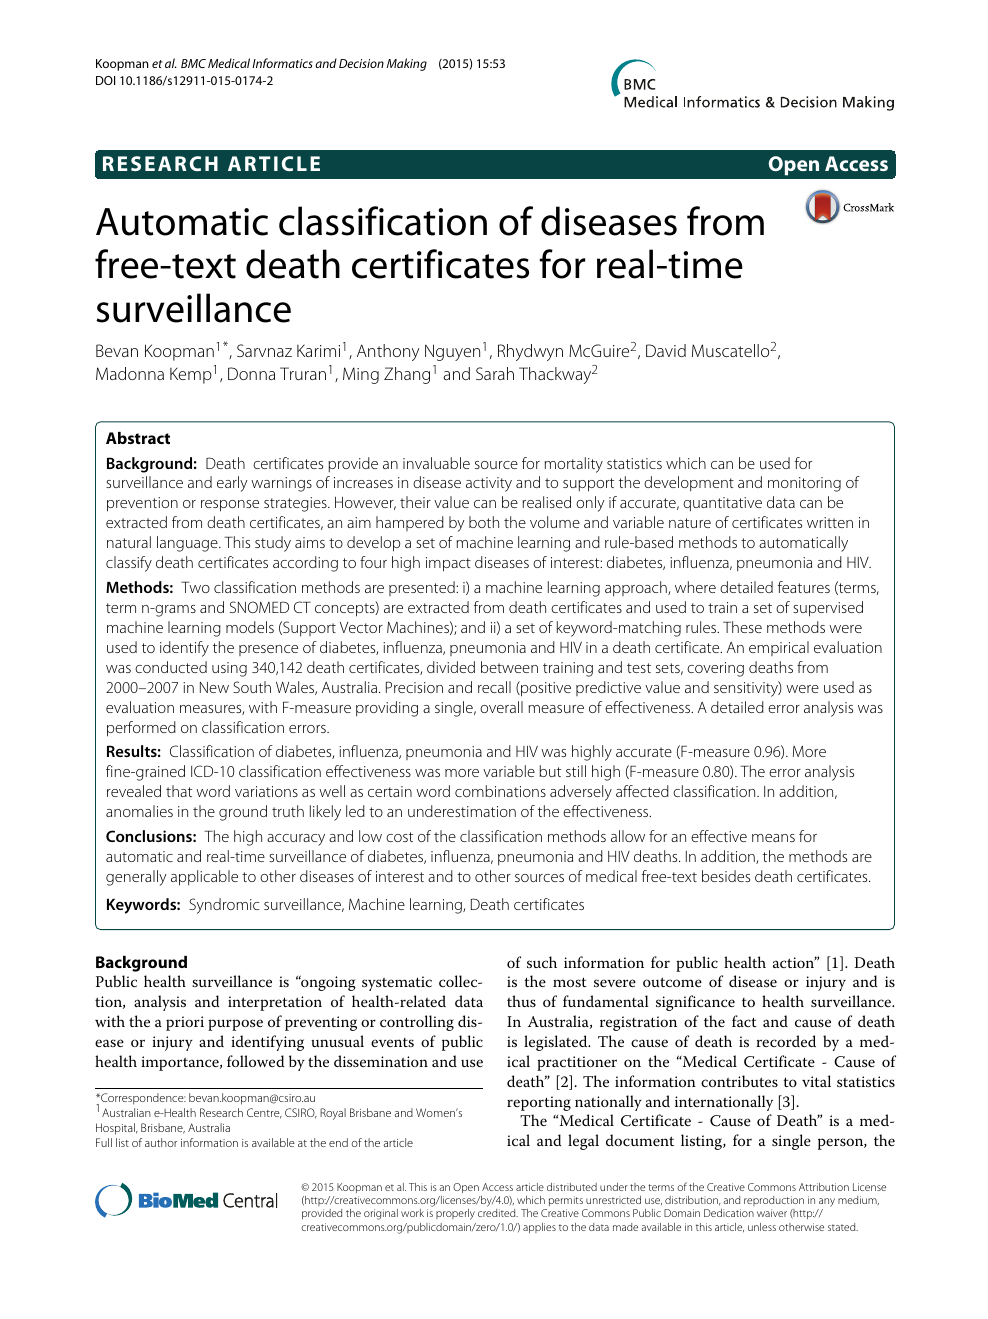 Diseases, Free Full-Text